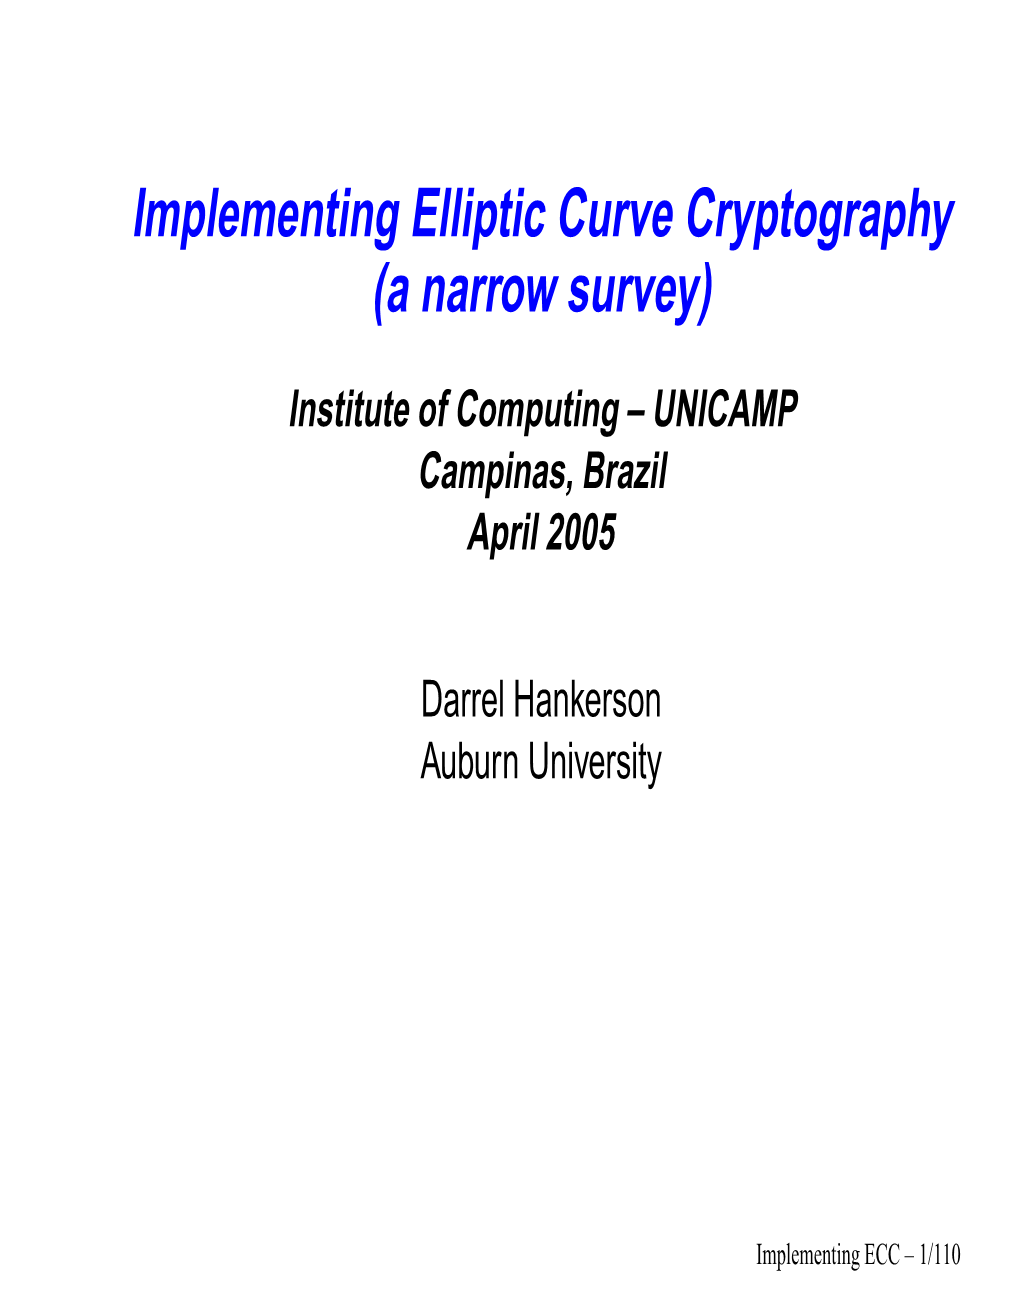 Implementing Elliptic Curve Cryptography (A Narrow Survey)